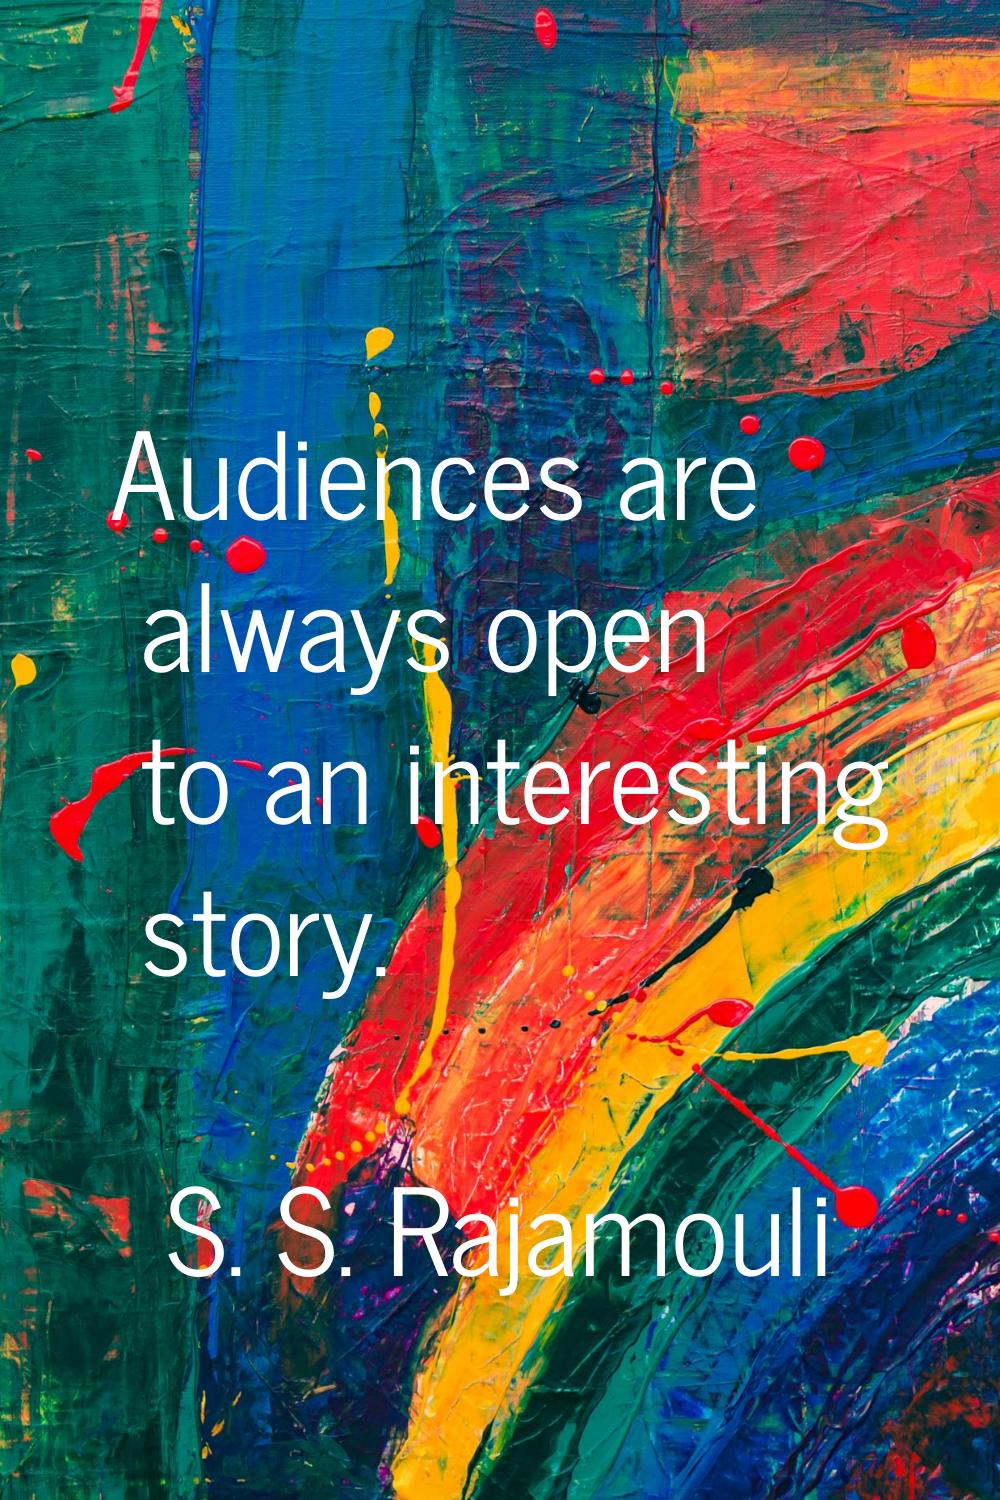 Audiences are always open to an interesting story.